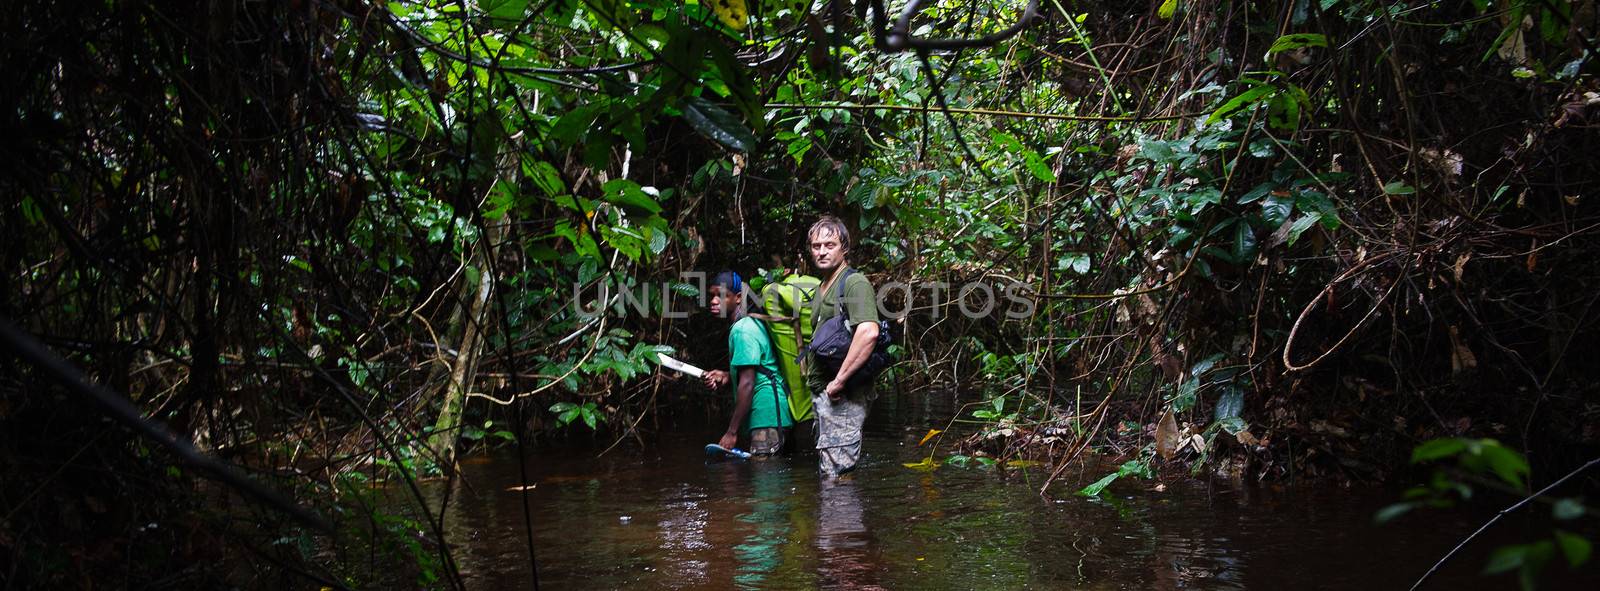 JUNGLE, CONGO, AFRICA - OCTOBER 2: The photographer in the jungle goes through a bog. October 2, 2013, Jungle, Republic of Congo. Africa. 